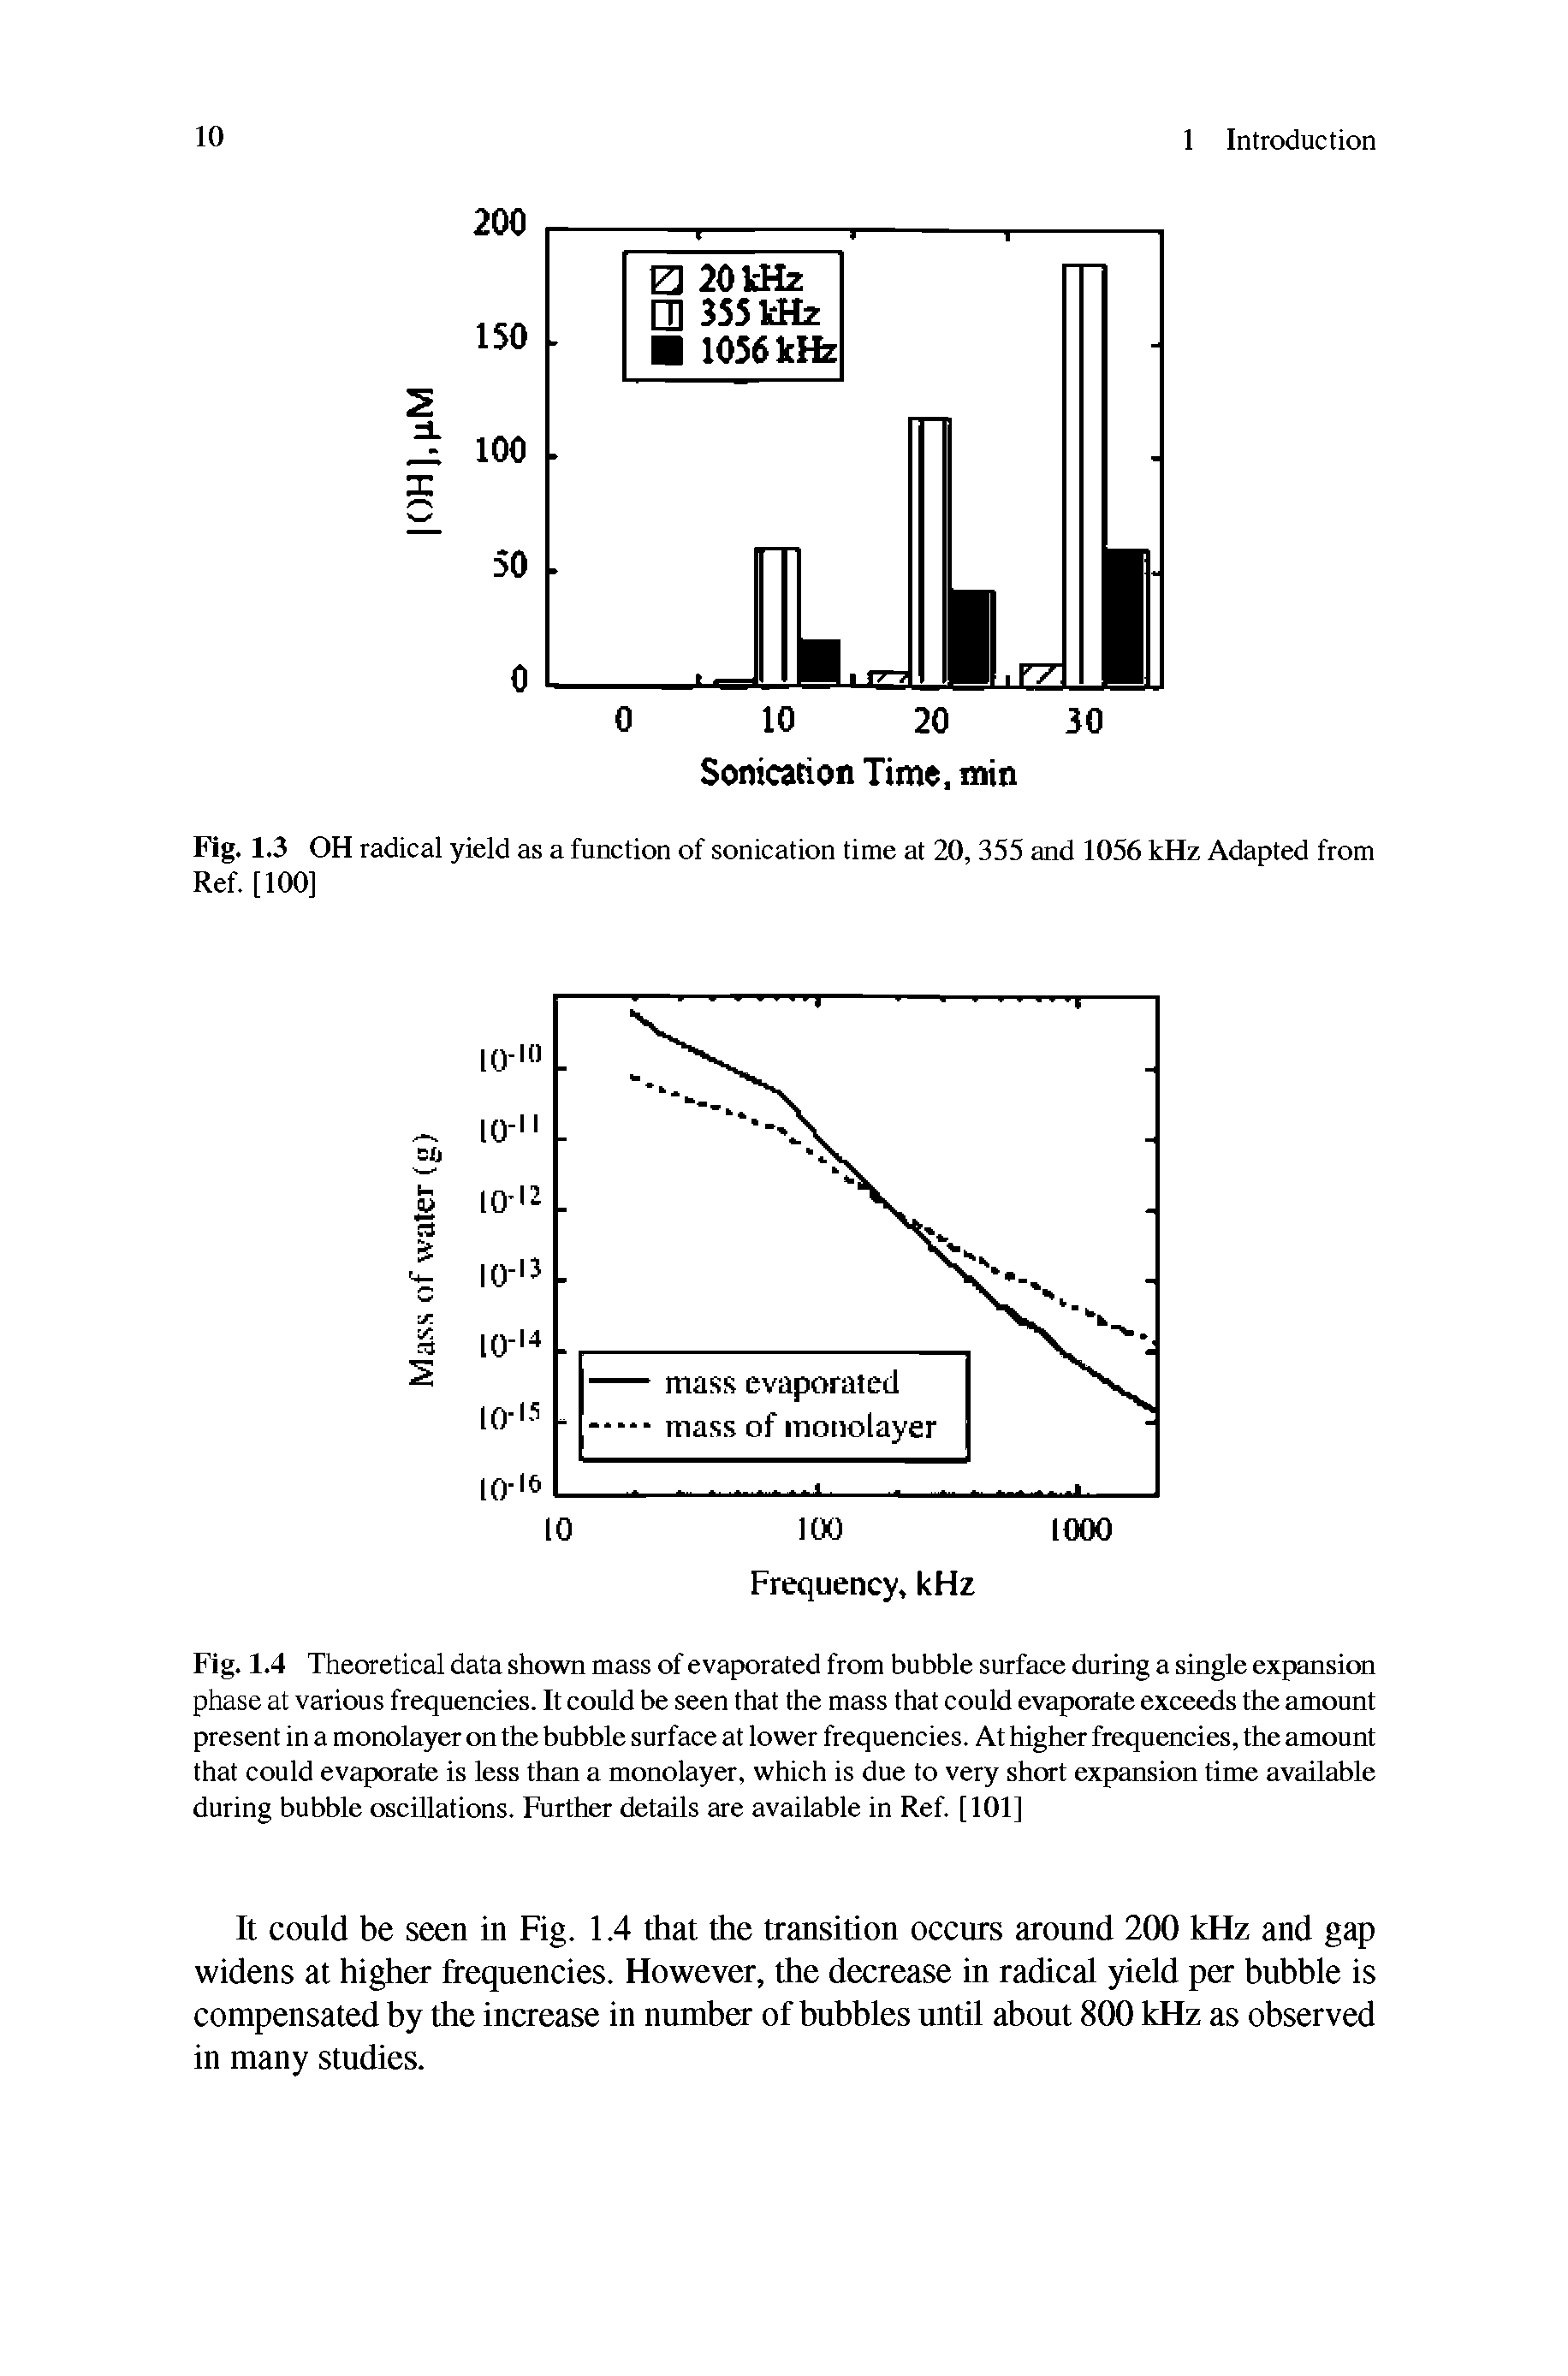 Fig. 1.4 Theoretical data shown mass of evaporated from bubble surface during a single expansion phase at various frequencies. It could be seen that the mass that could evaporate exceeds the amount present in a monolayer on the bubble surface at lower frequencies. At higher frequencies, the amount that could evaporate is less than a monolayer, which is due to very short expansion time available during bubble oscillations. Further details are available in Ref [101]...